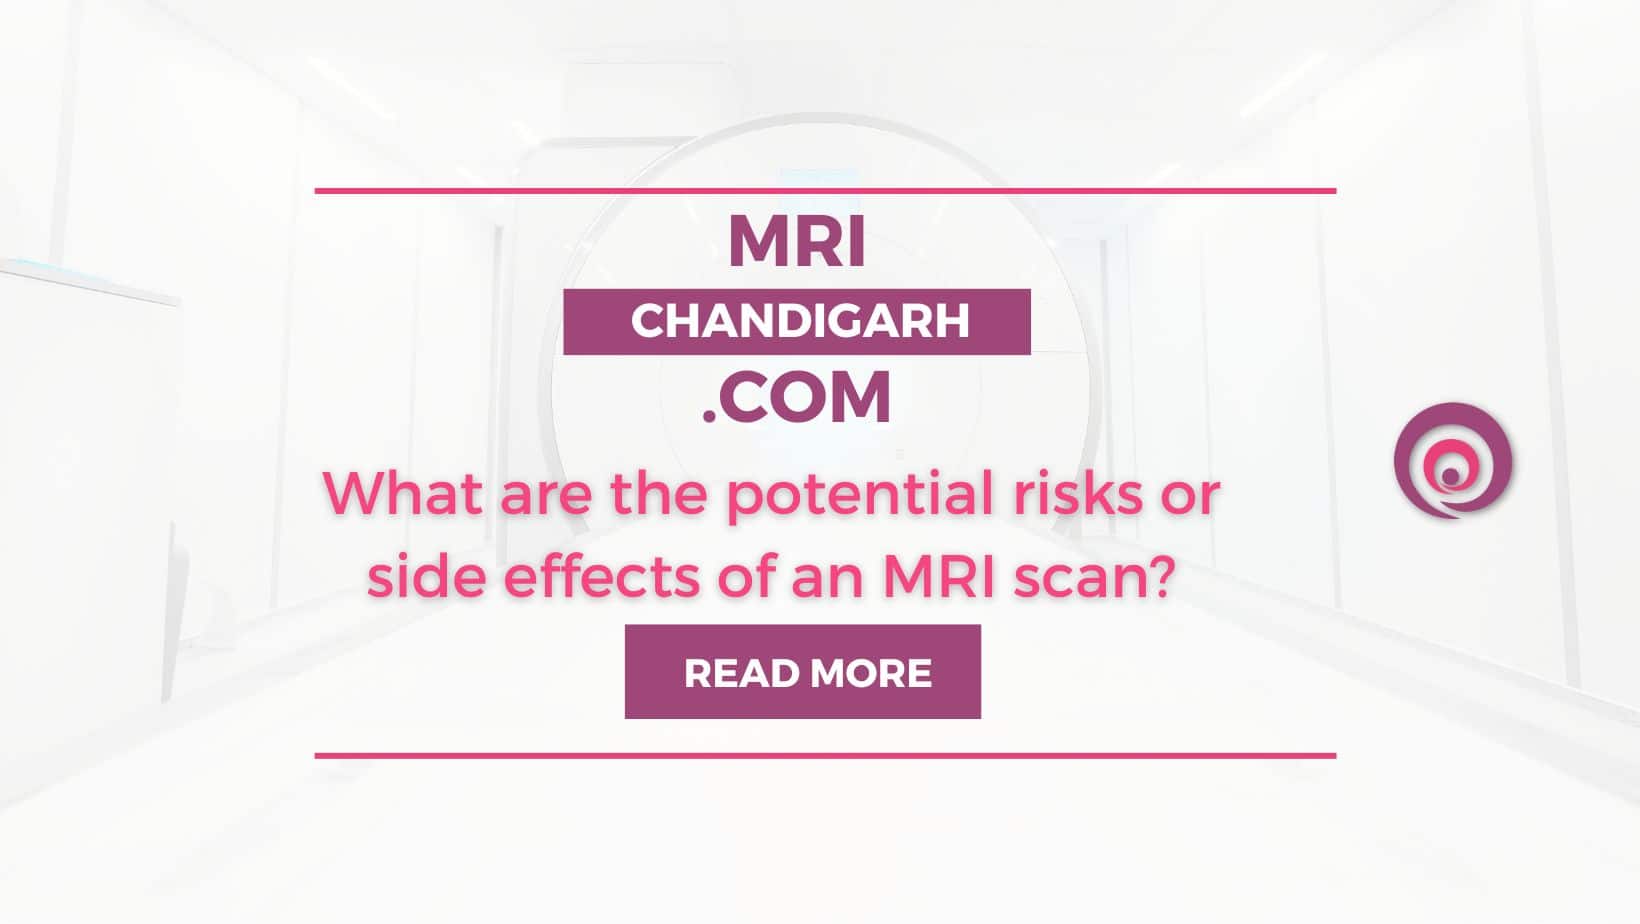 What are the potential risks or side effects of an MRI scan?